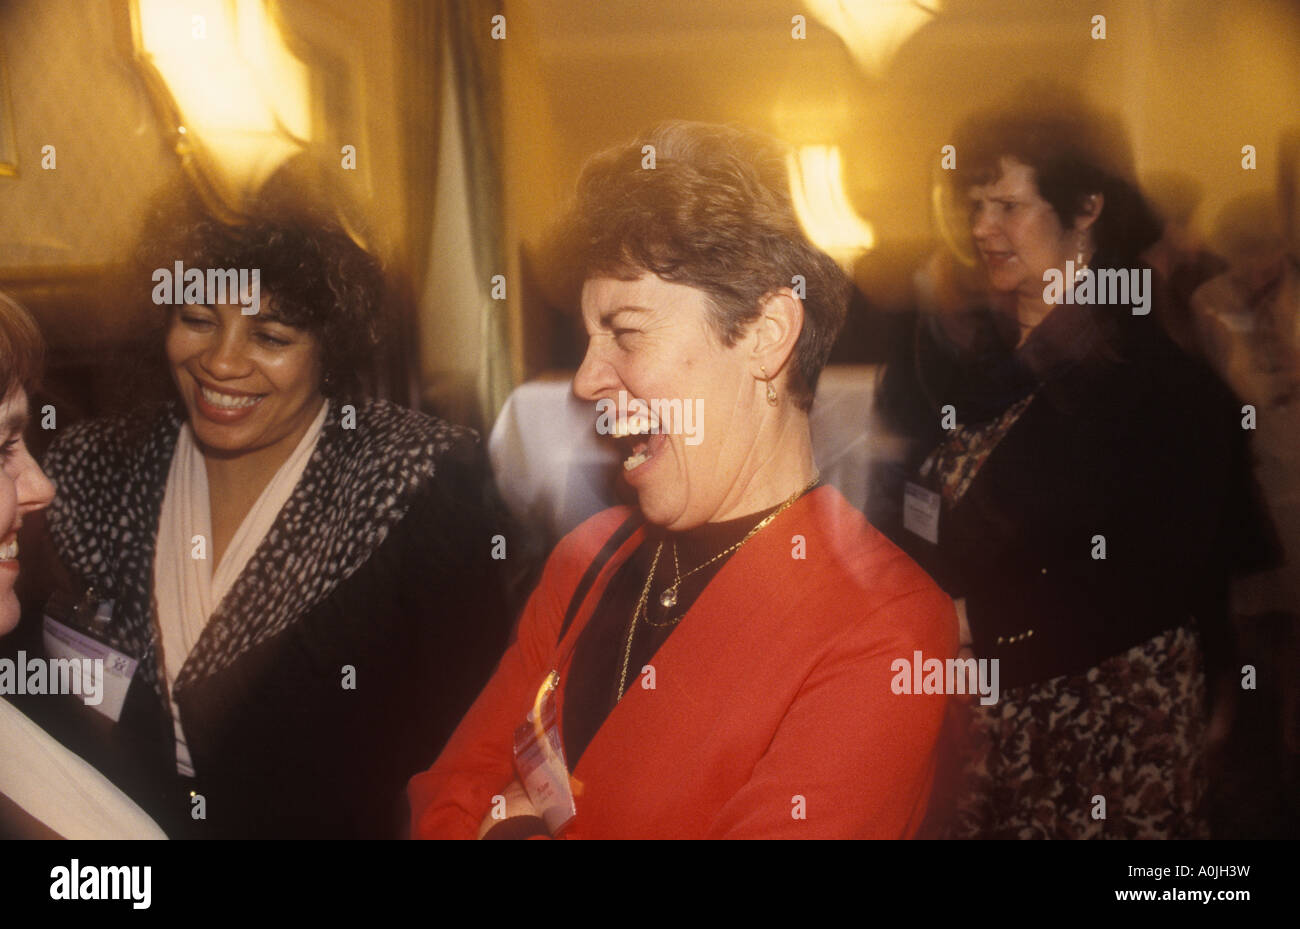 A woman howls with laughter at a reception held by the Health Visitors Association in the House of Commons, London, UK, 09/1997. Stock Photo